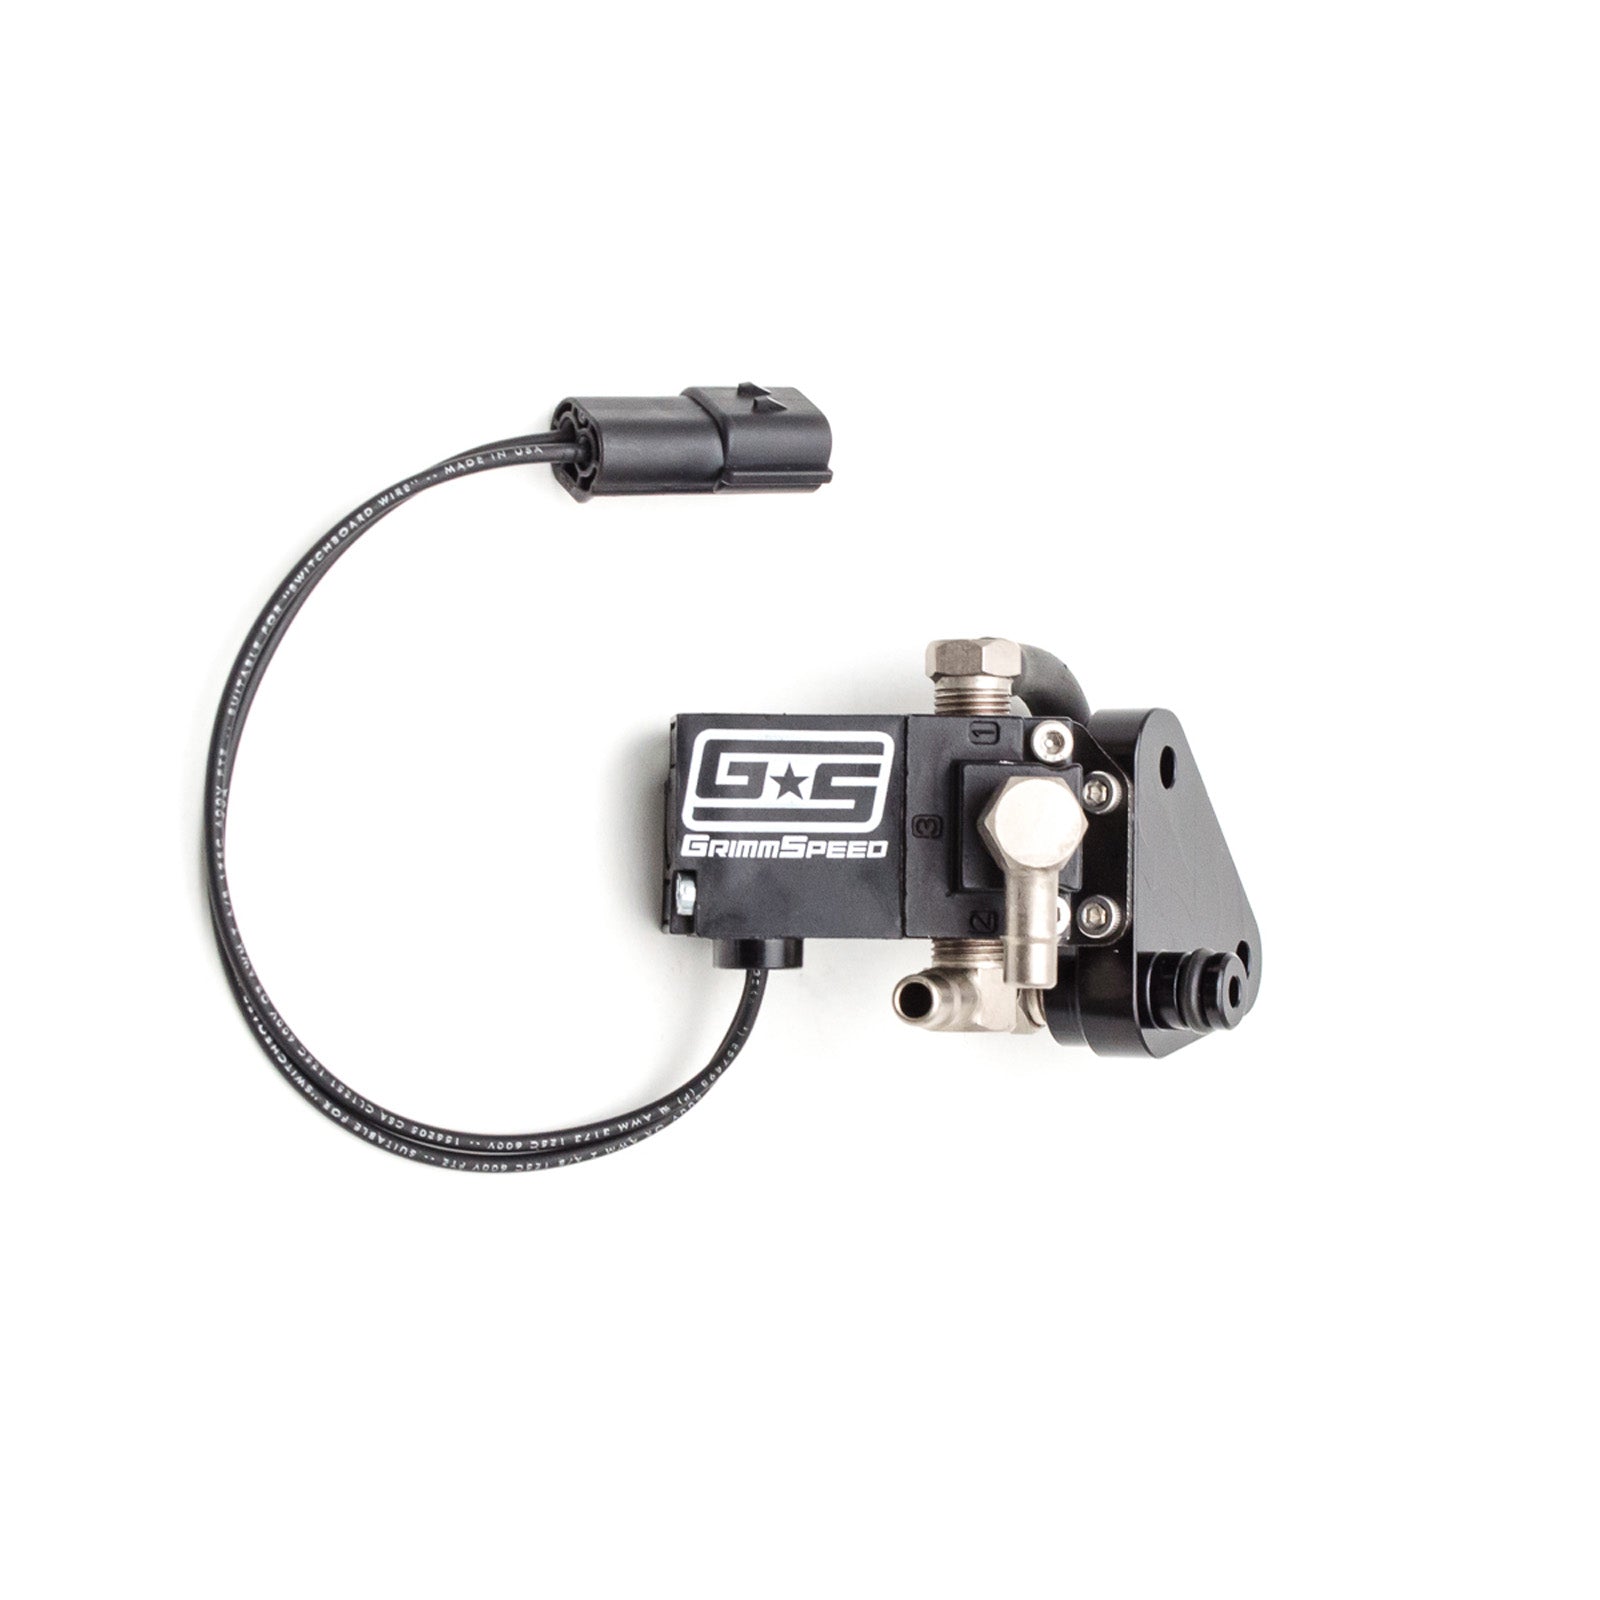 GrimmSpeed 3-Port Electronic Boost Control Solenoid - 2015-21 Subaru WRX [Canadian Inlet]